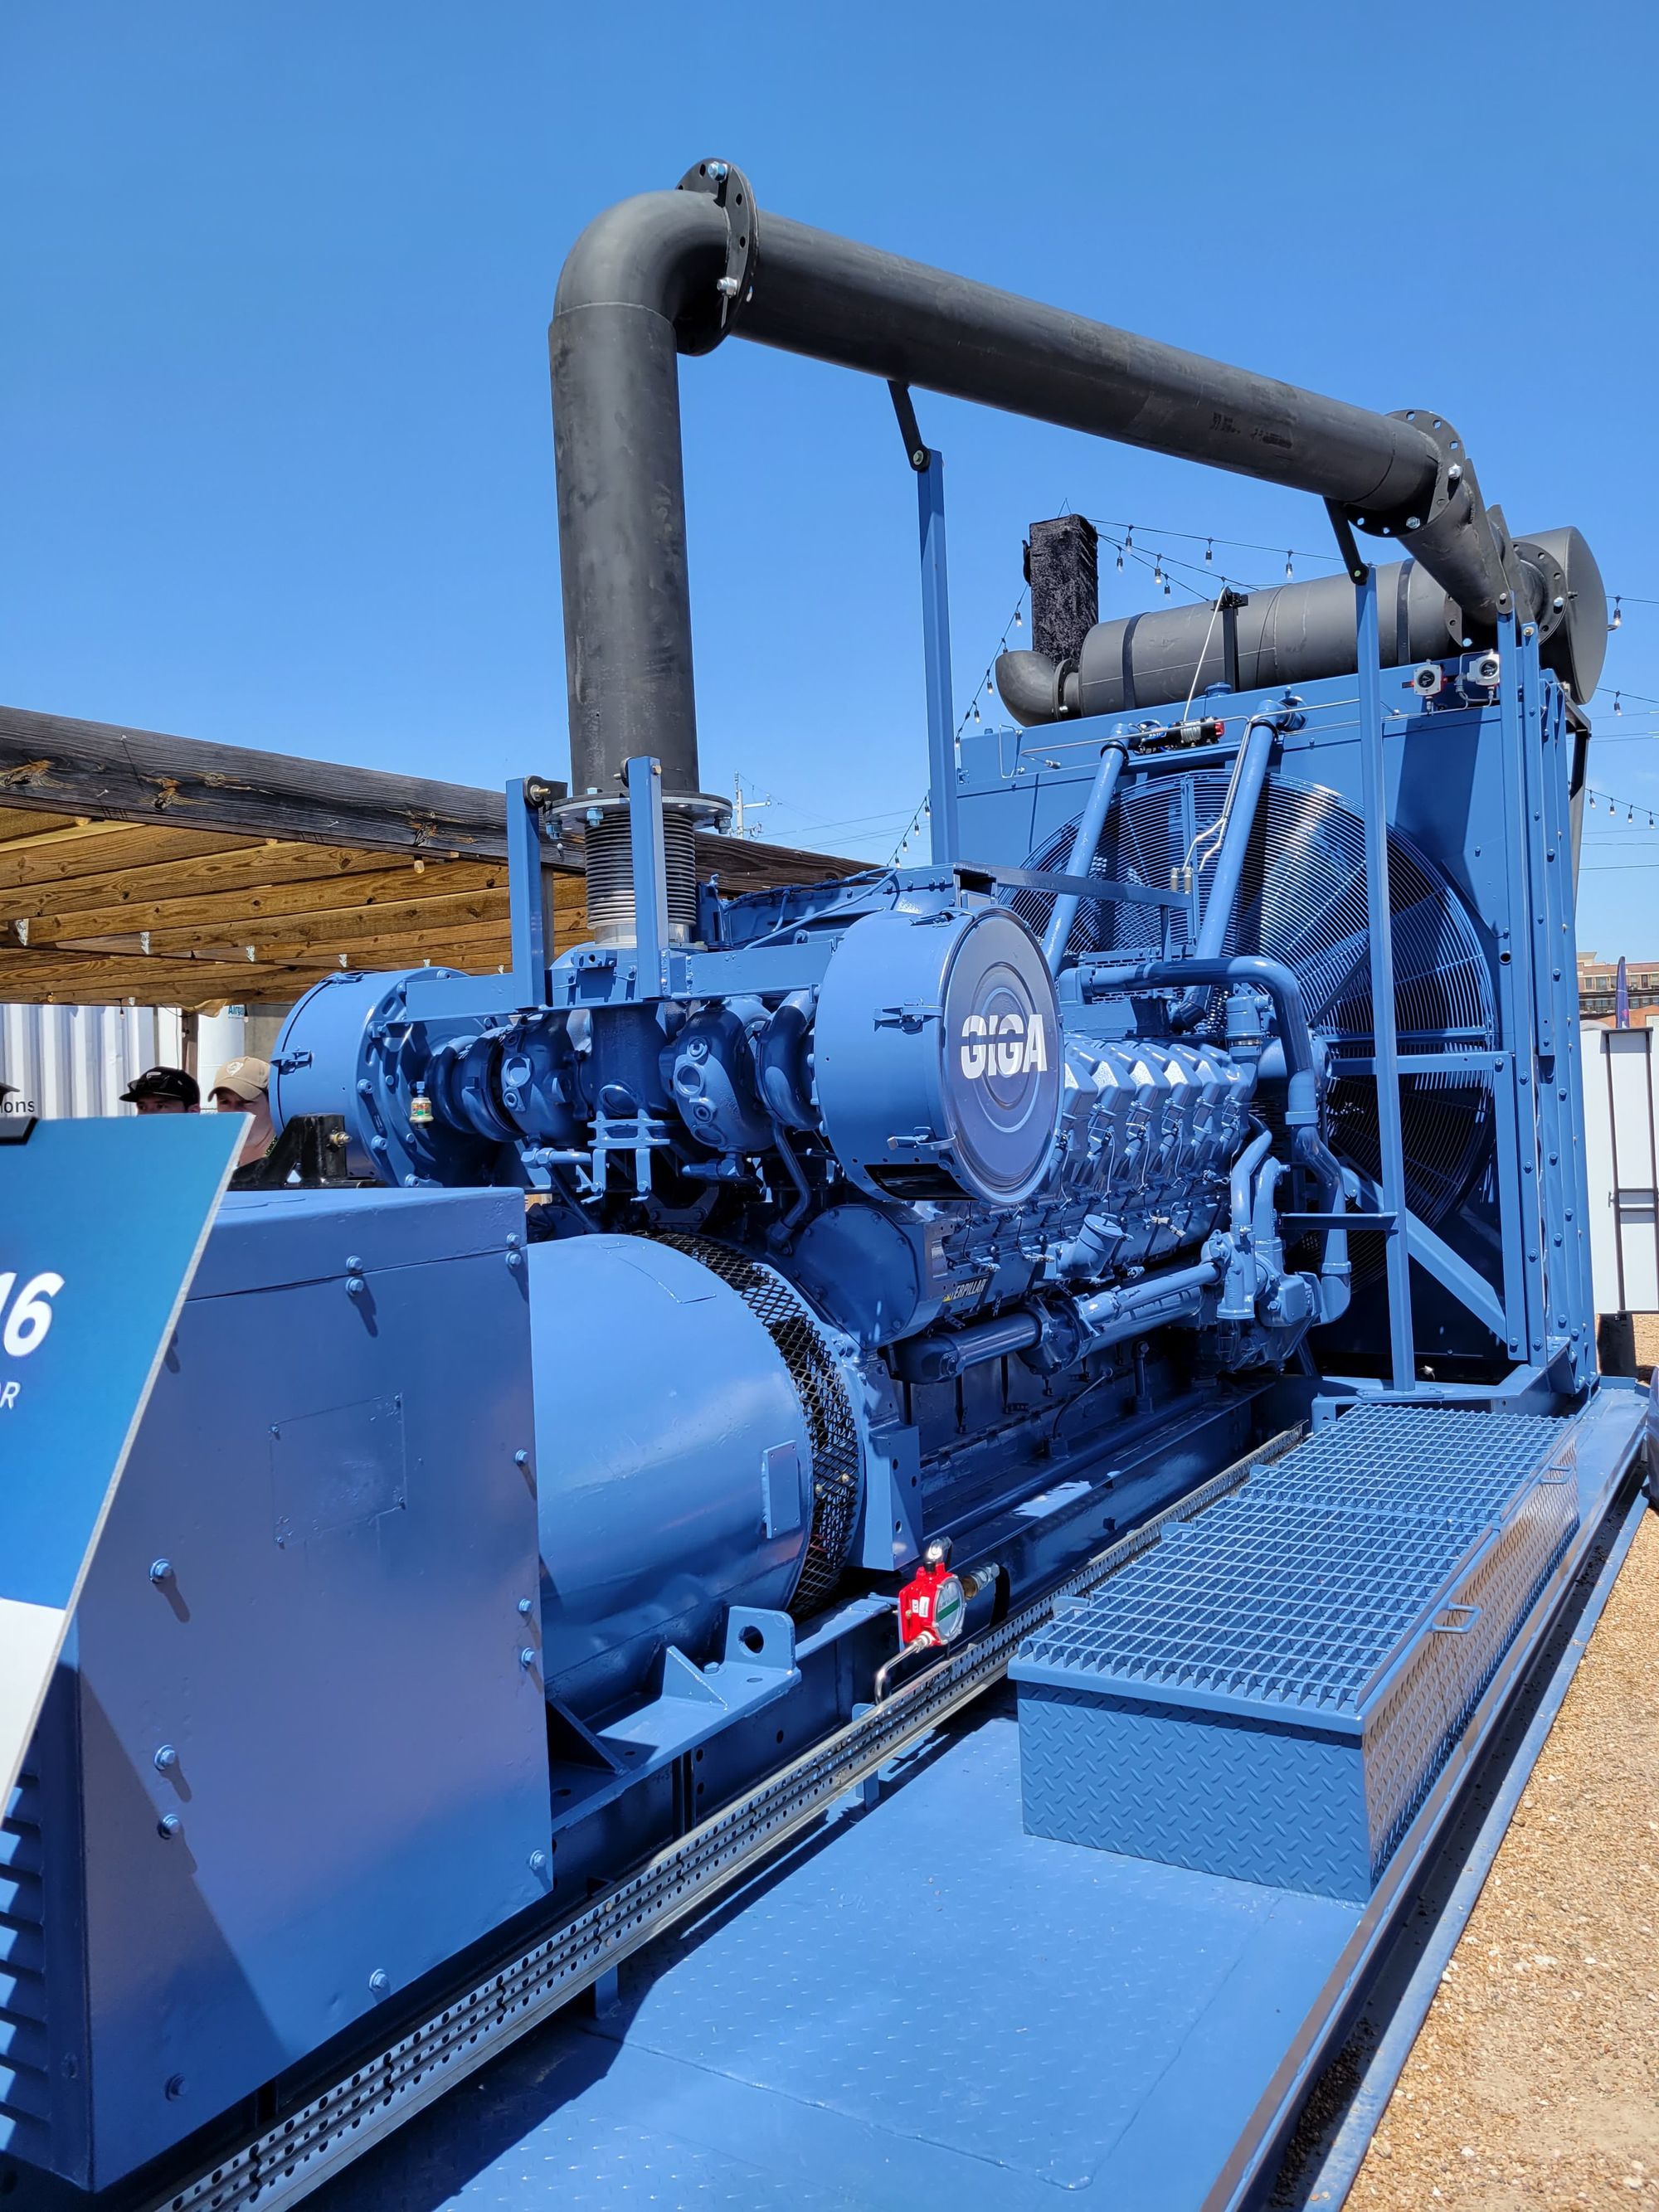 On display at  Digital Wildcatters March 2022 Empower: Energizing Bitcoin, one of Giga Energy's 750 KW, custom natural gas generators for Bitcoin mining